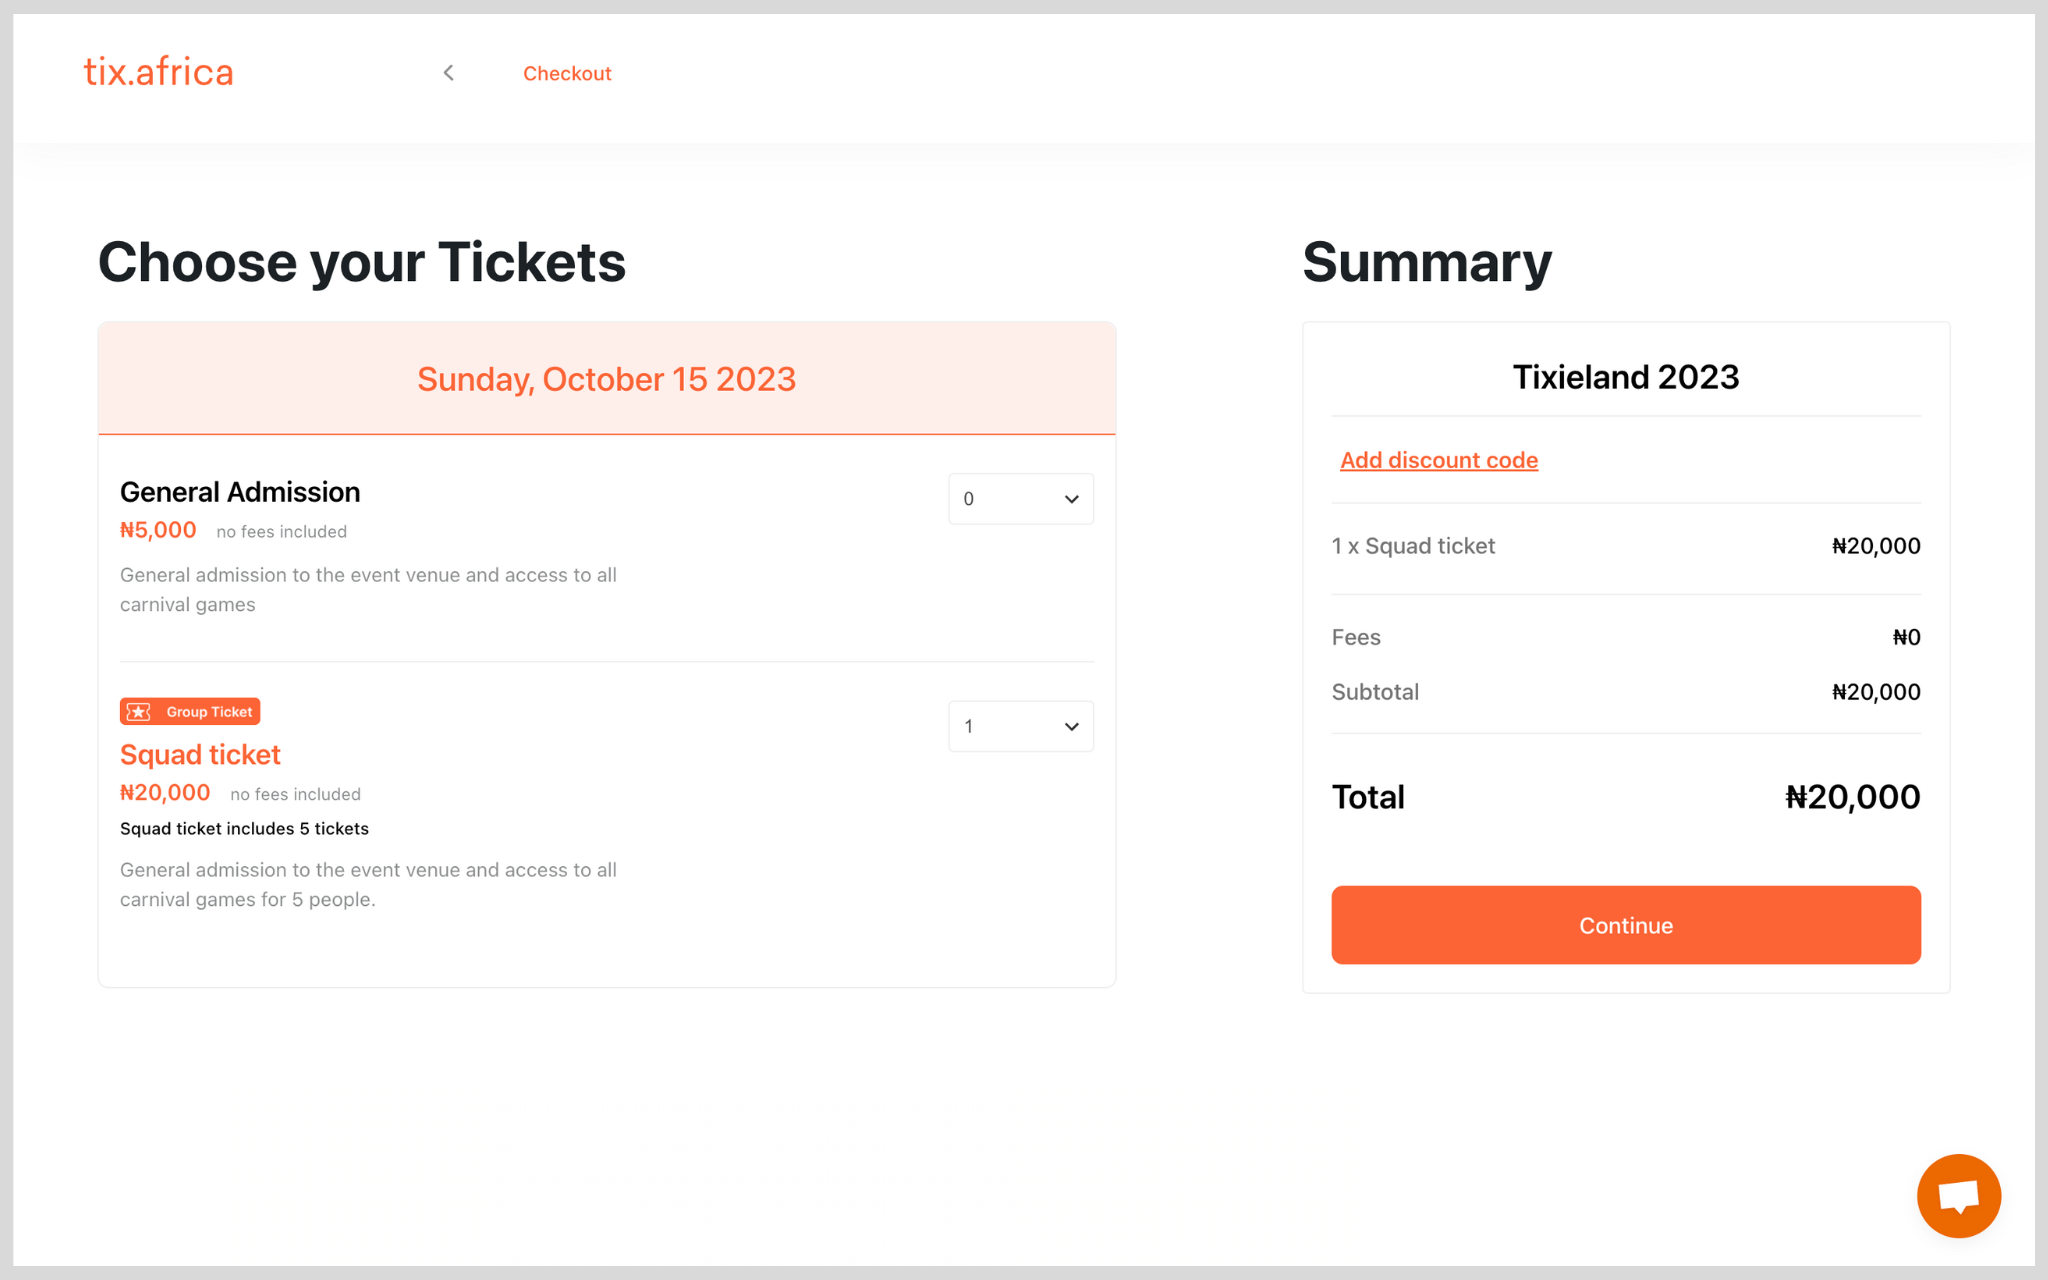 Introducing Group Tickets: Why You Should Offer Them At Your Next Event